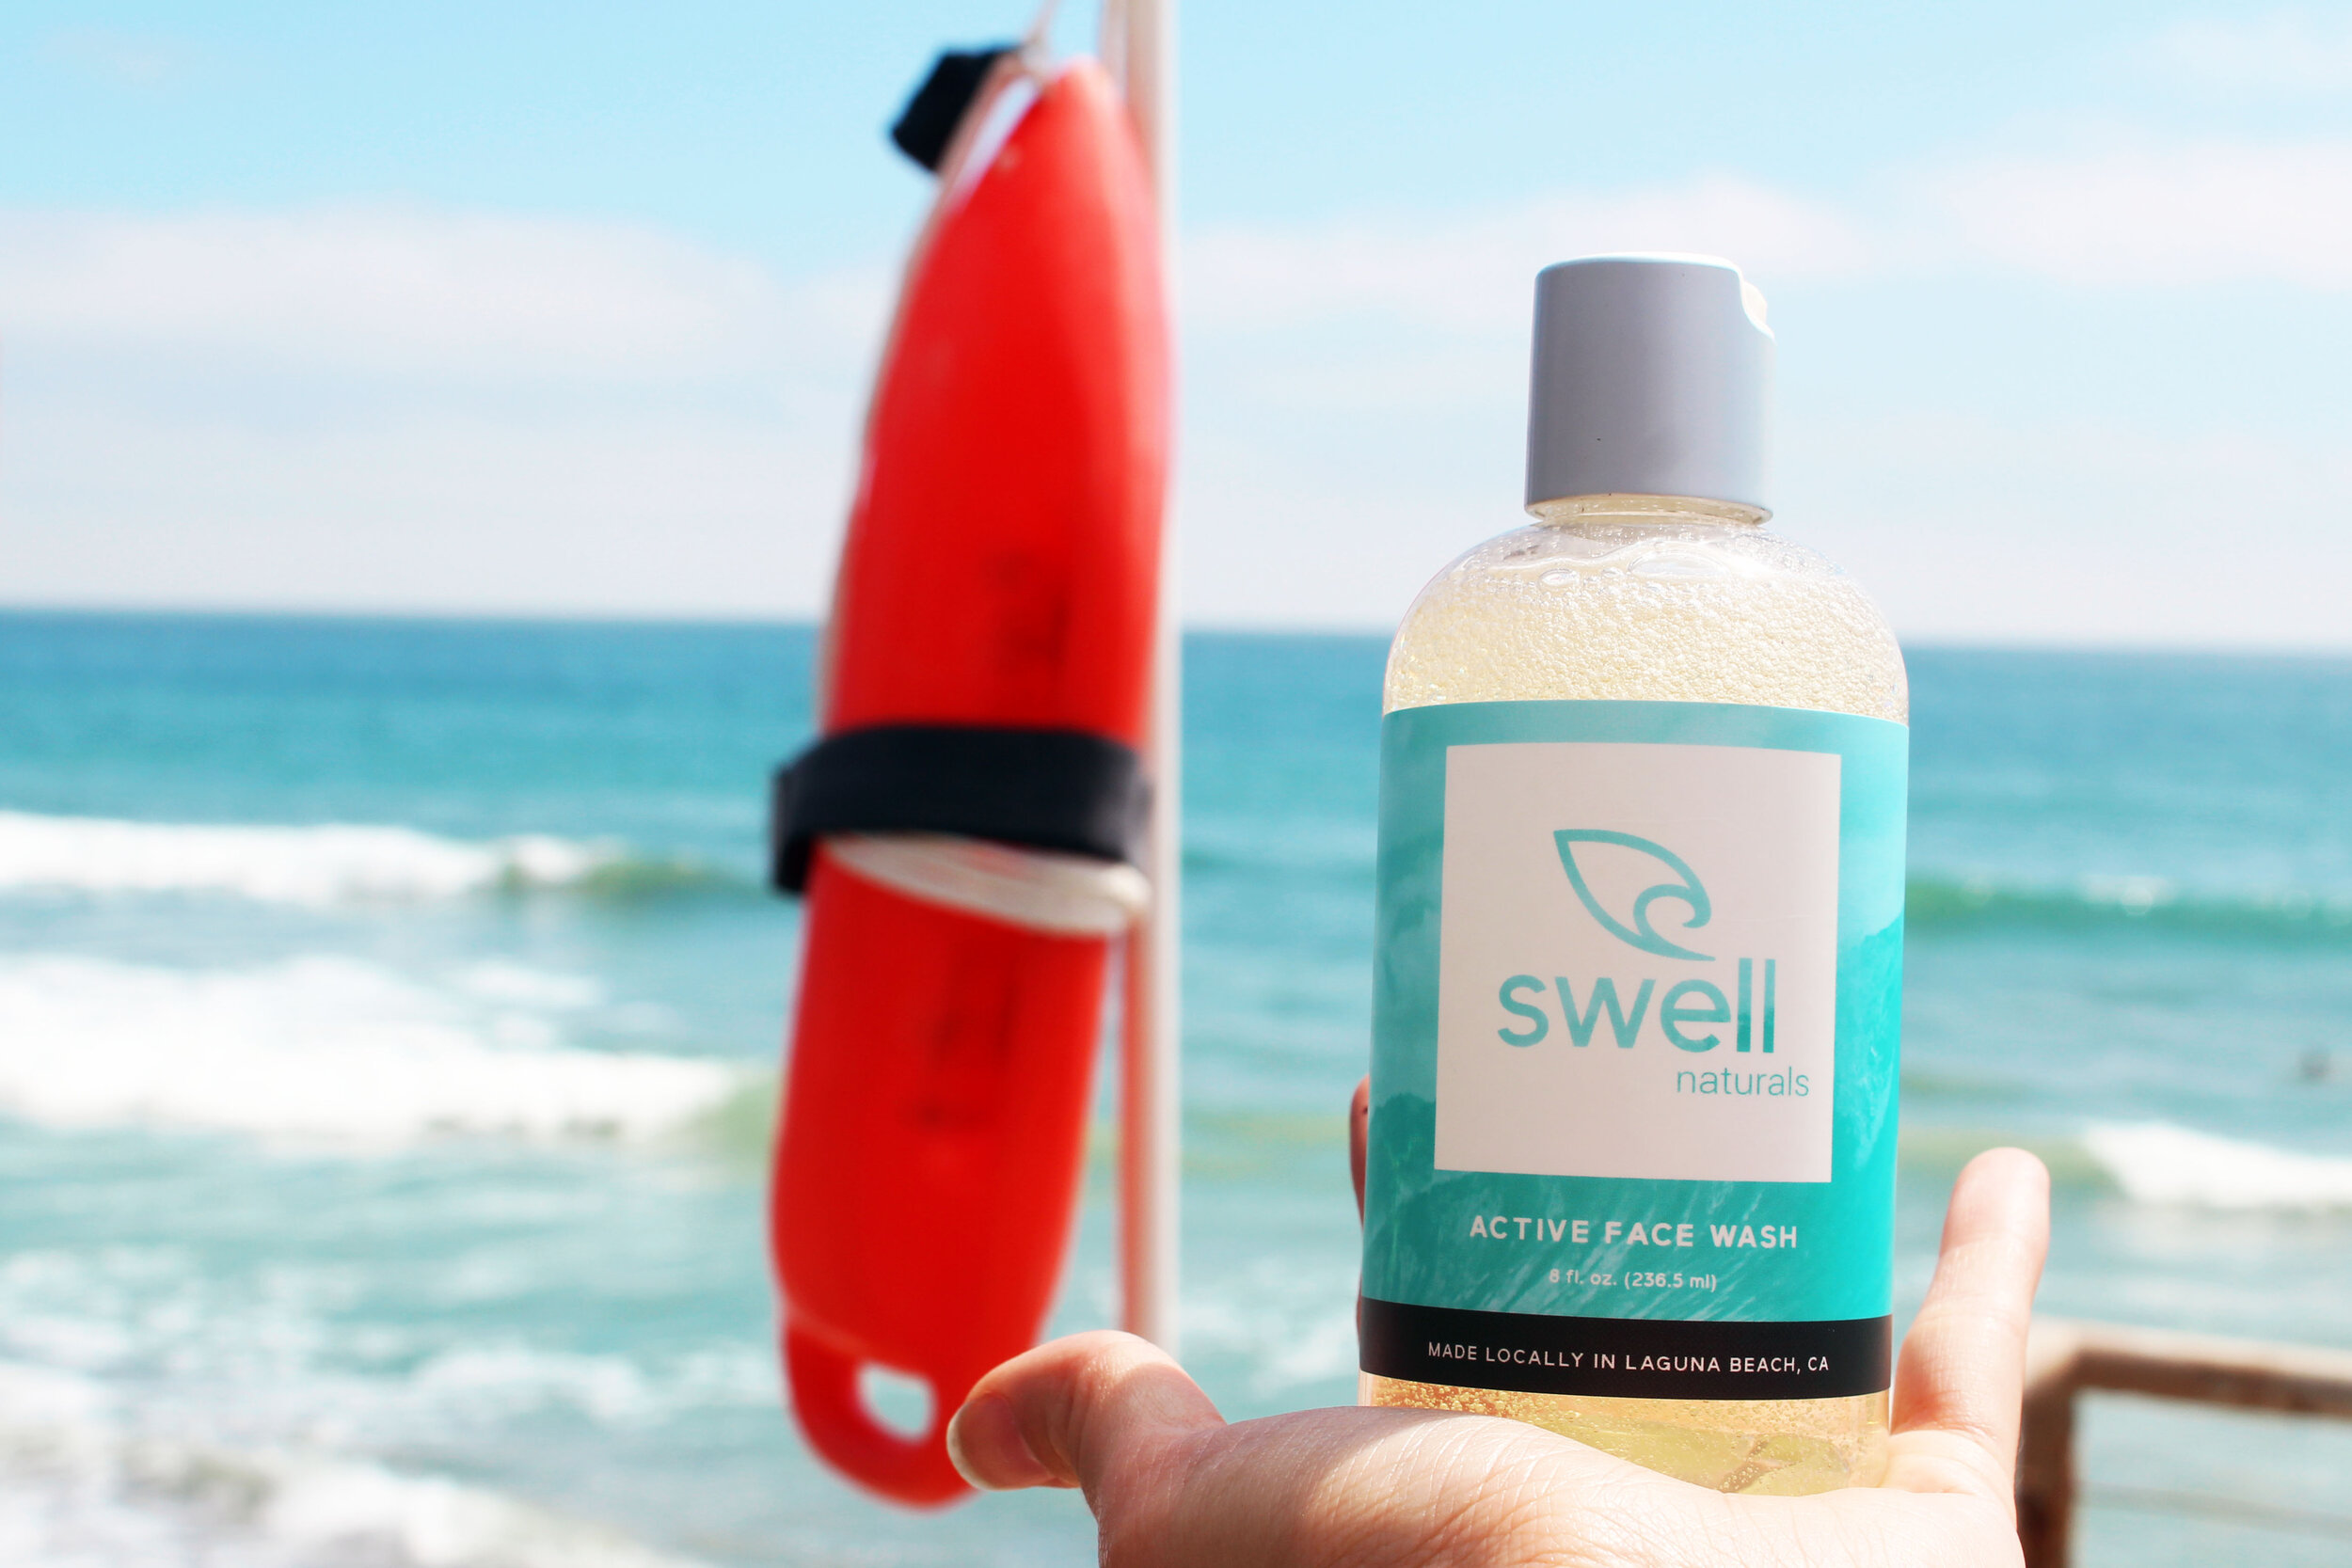 Swell Naturals